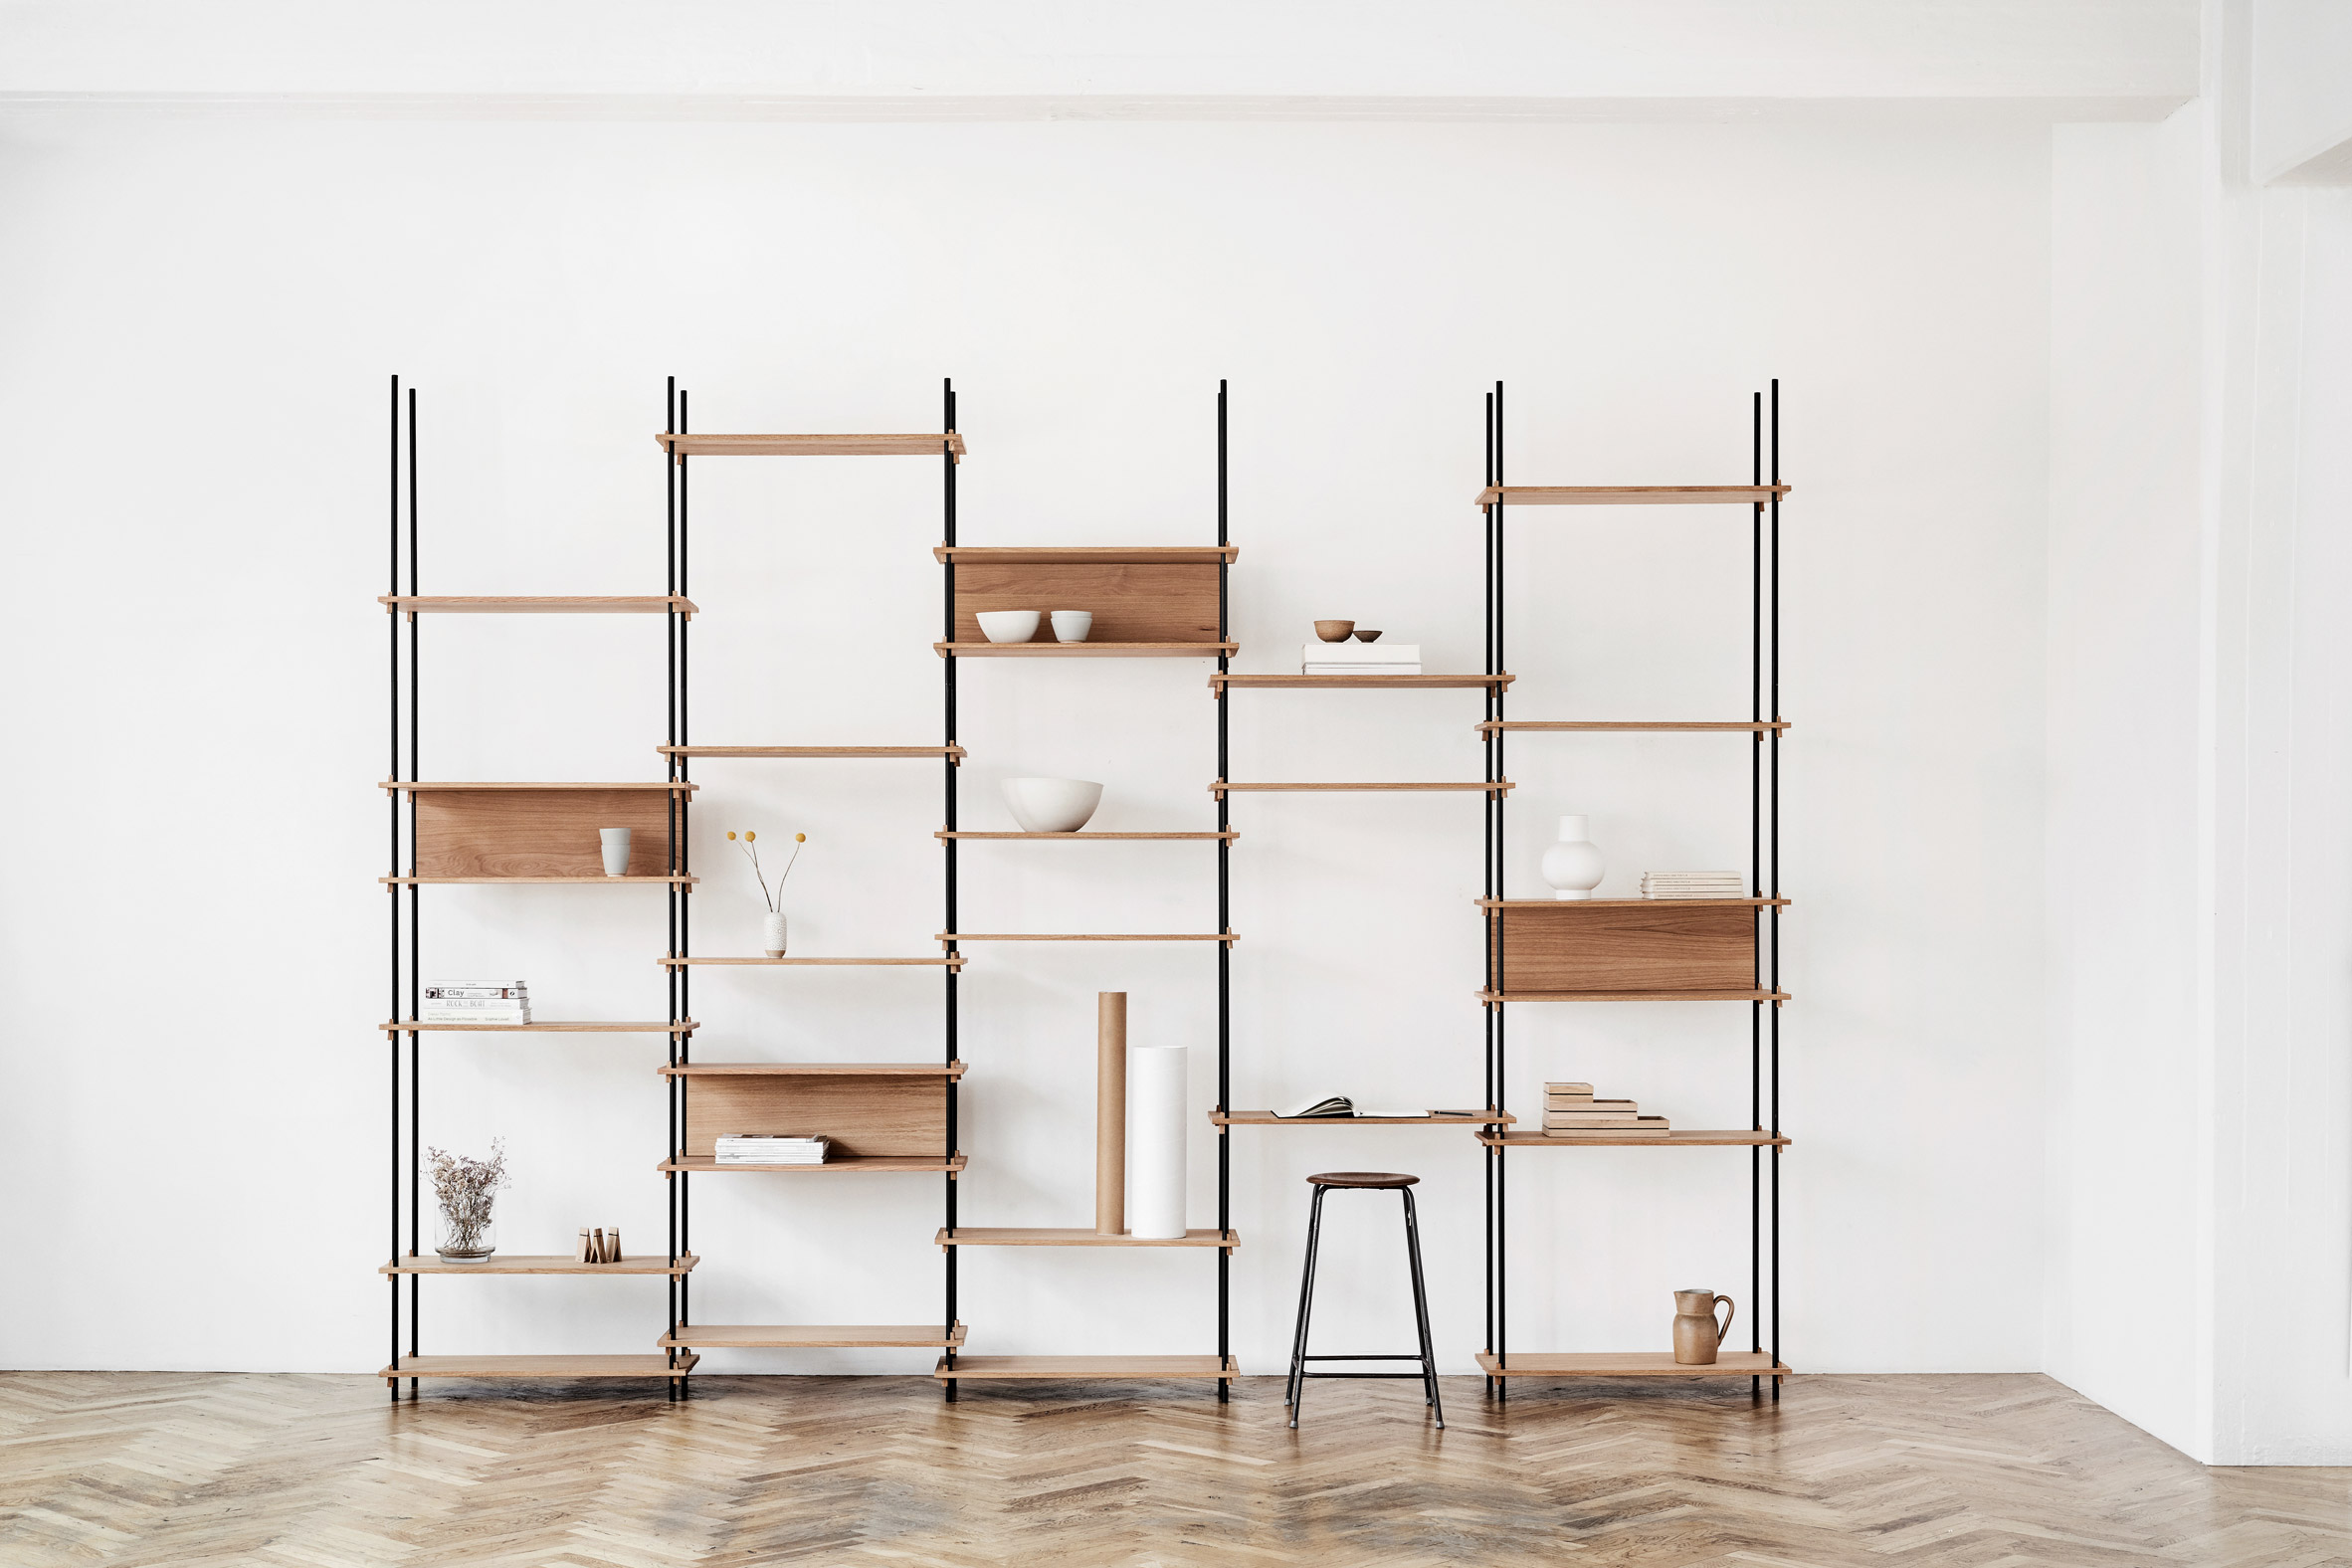 Moebe creates flexible shelving system that is held together by wooden wedges